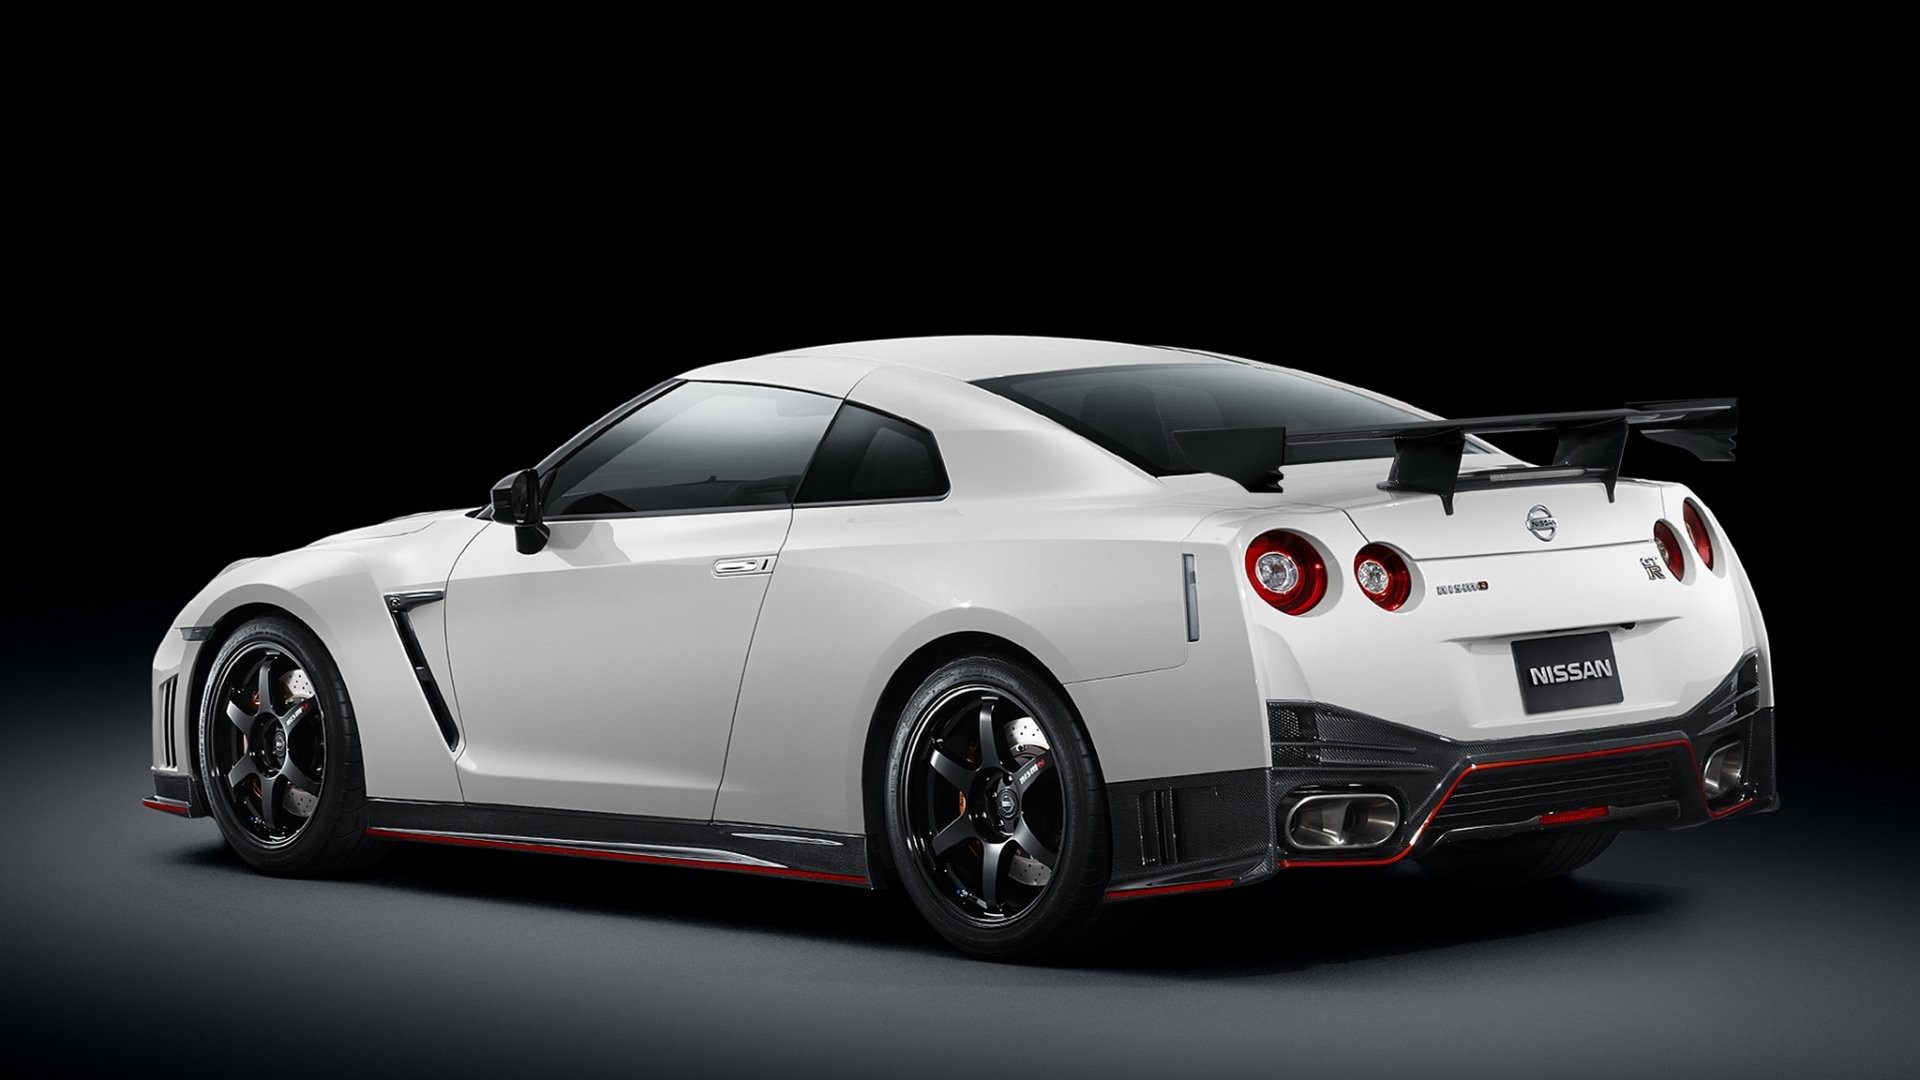 Wallpapers Nissan GT R auto design cars on the desktop